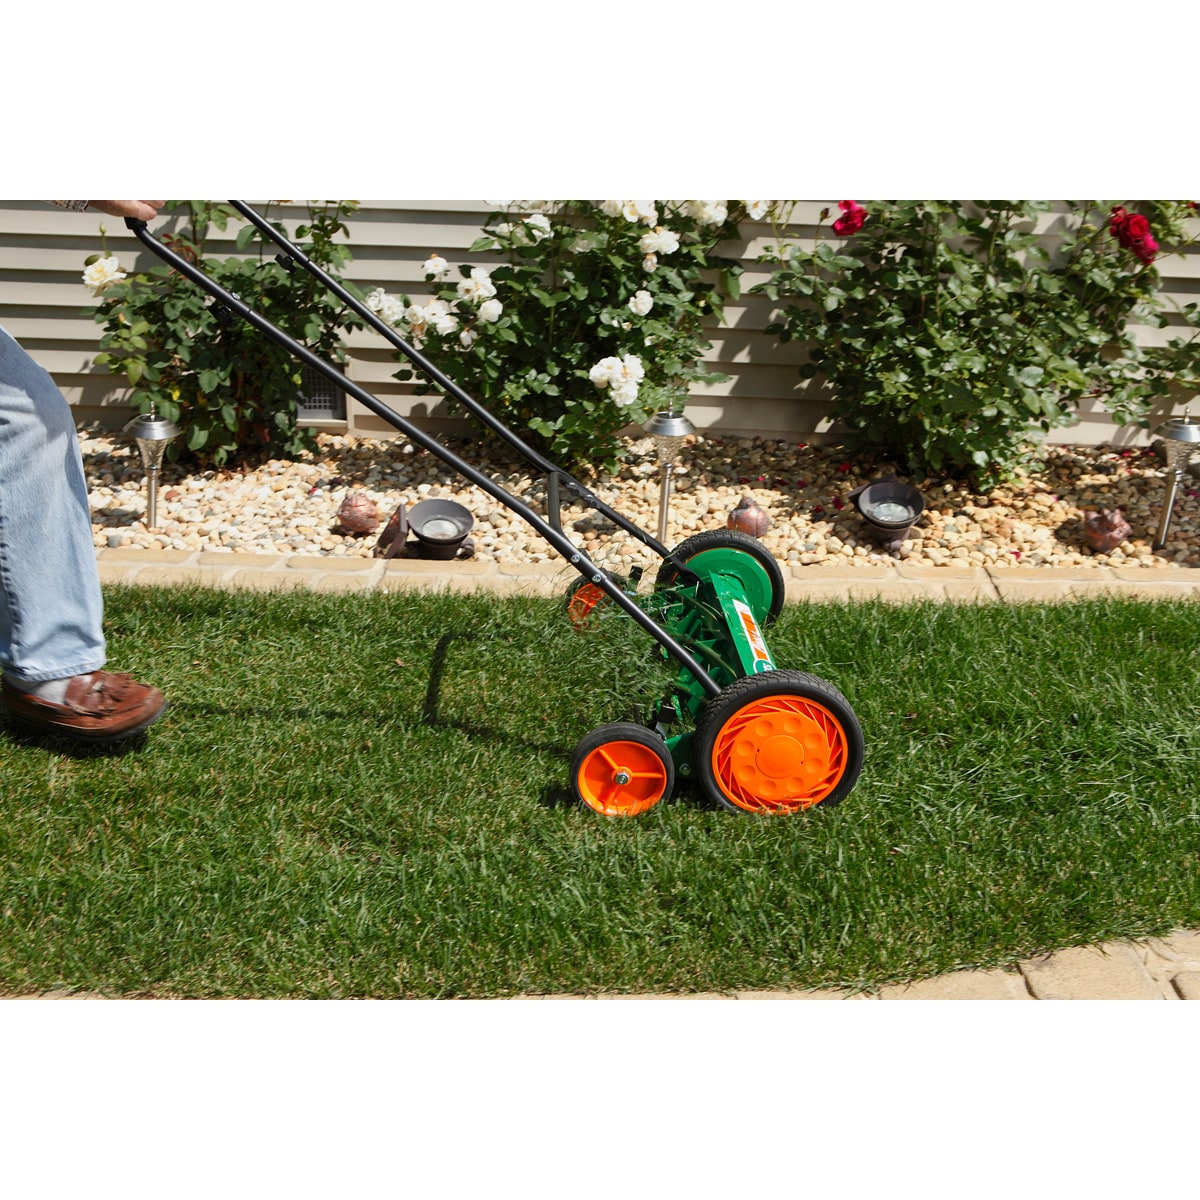 Scotts Classic 20 In. Push Reel Lawn Mower - Power Townsend Company